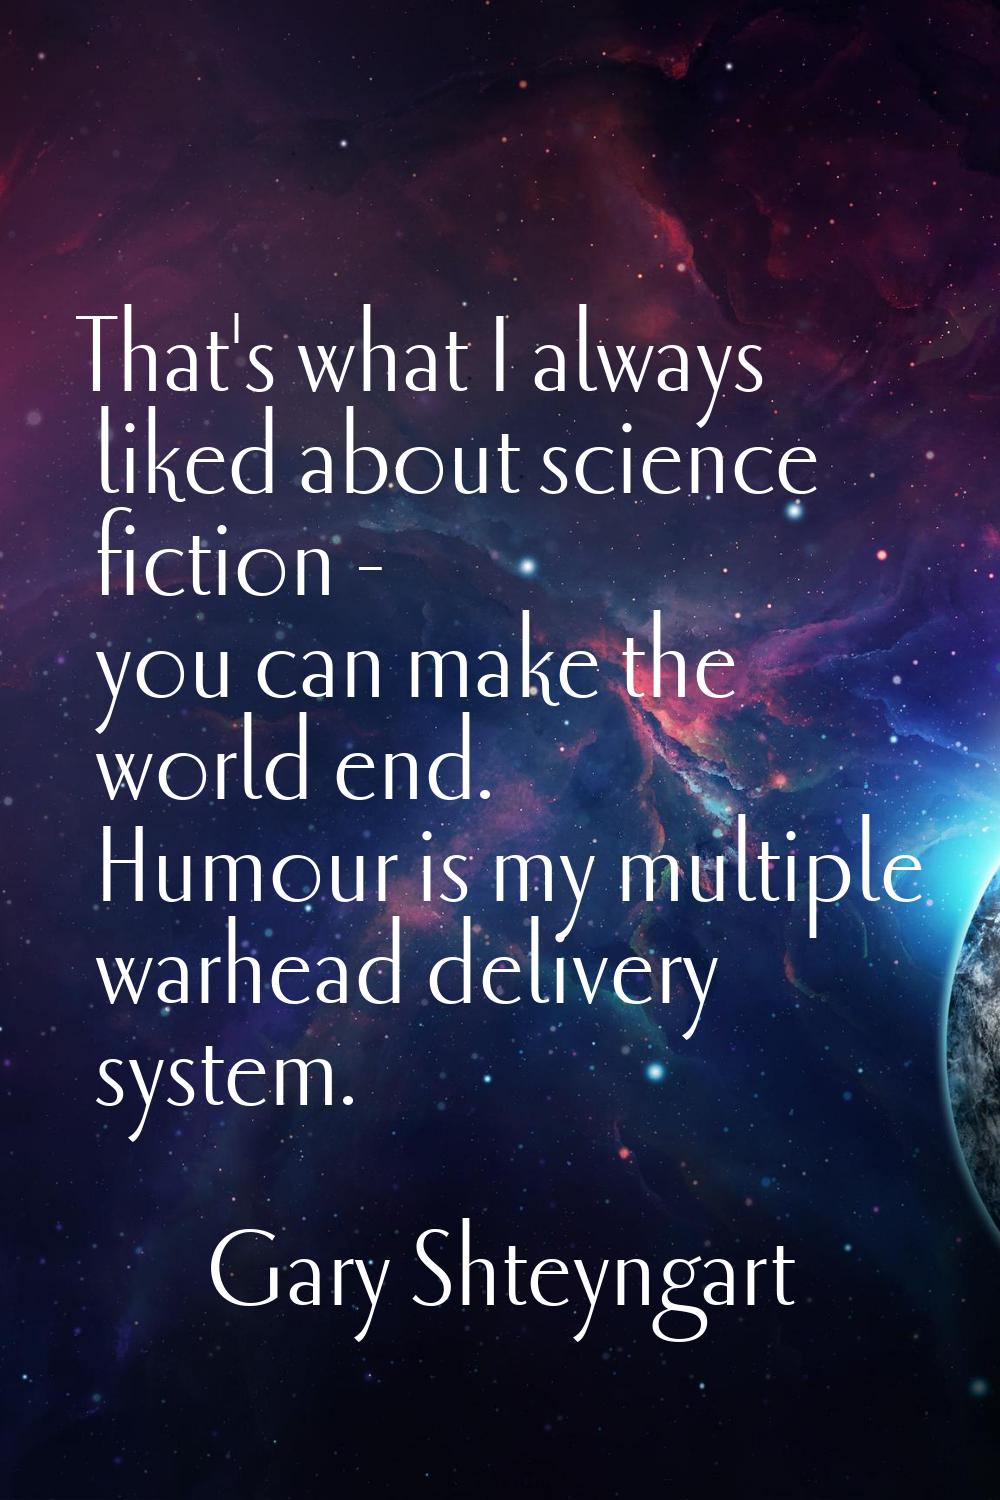 That's what I always liked about science fiction - you can make the world end. Humour is my multipl